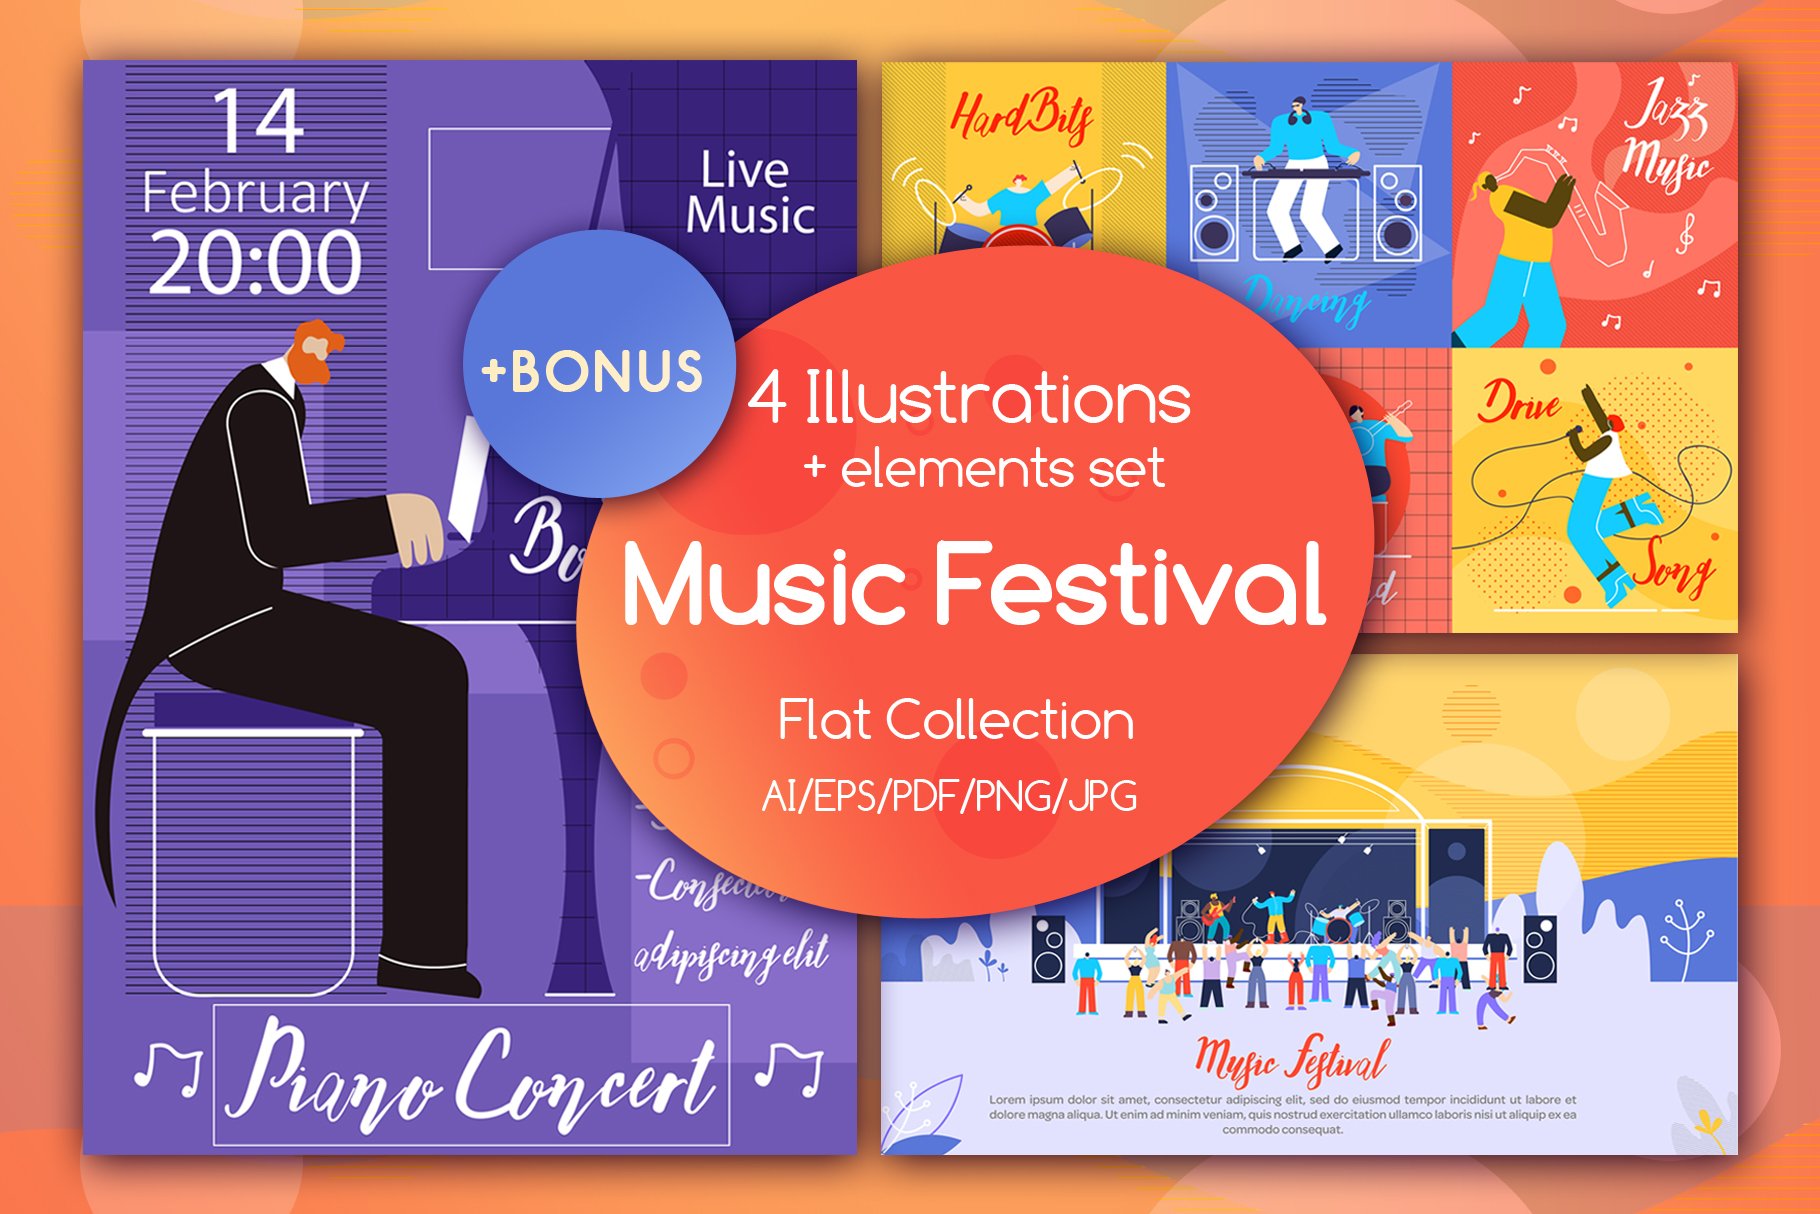 Music Festival Flat Collection cover image.